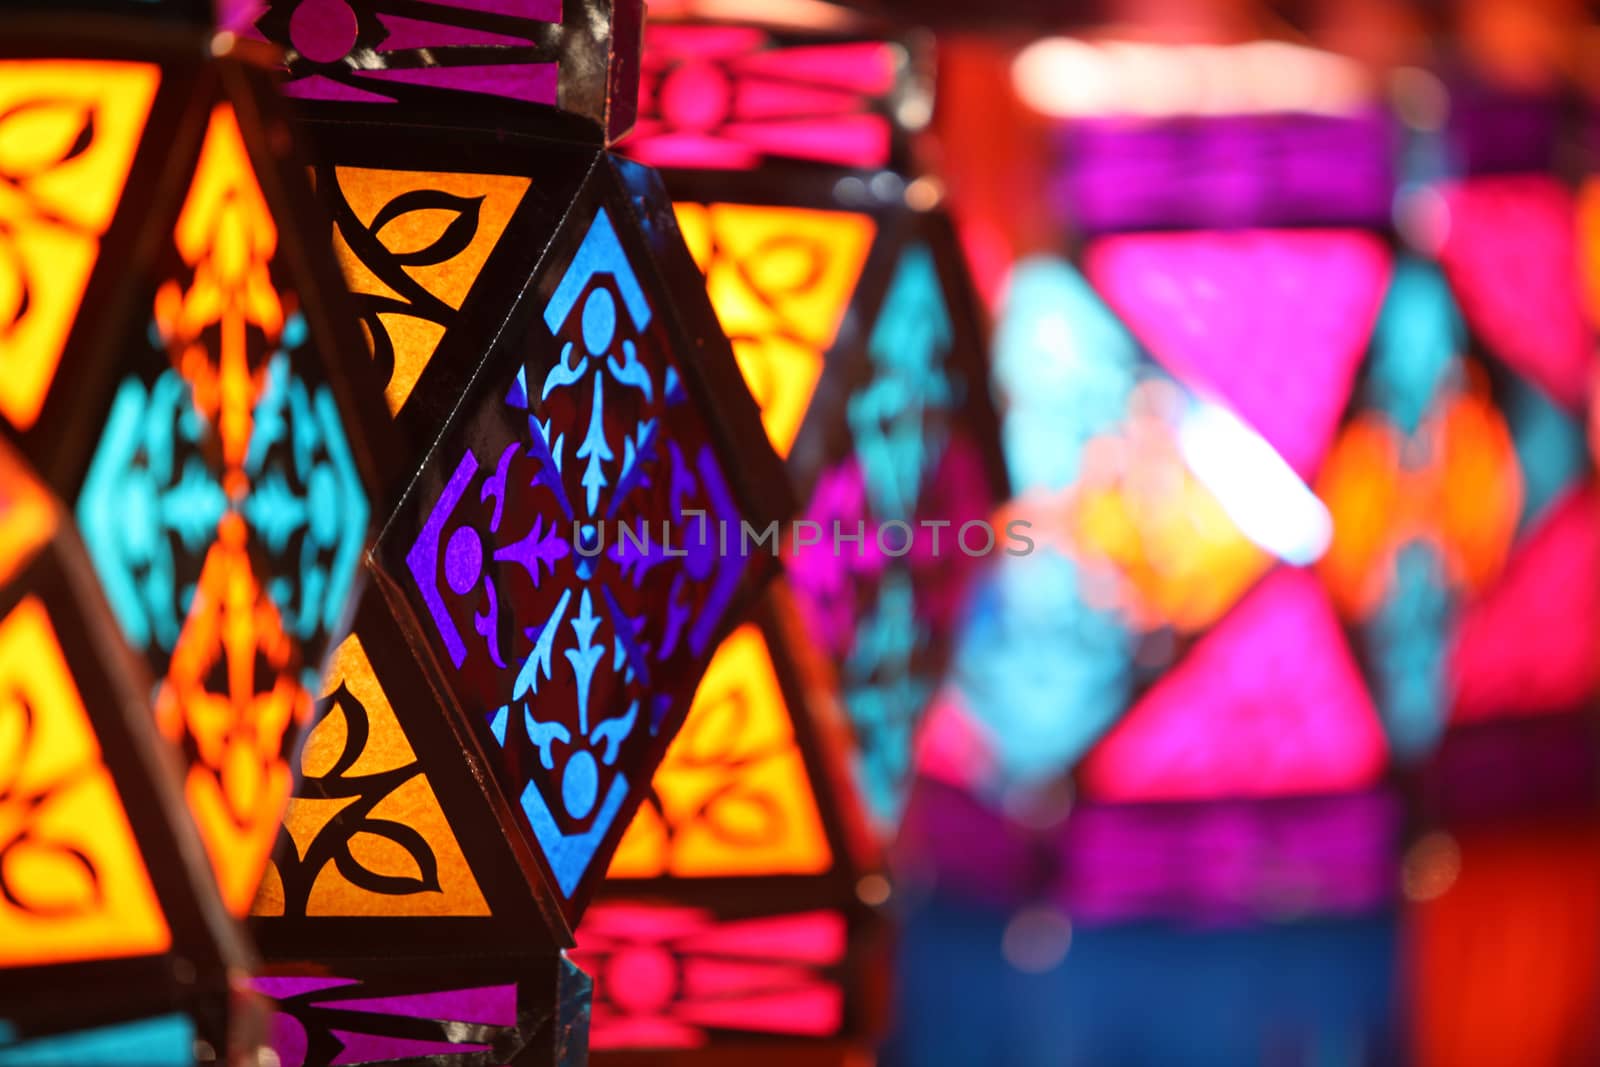 Beautiful colorful traditional lanterns for sale in a shop on occasion of Diwali / Christmas festival in India